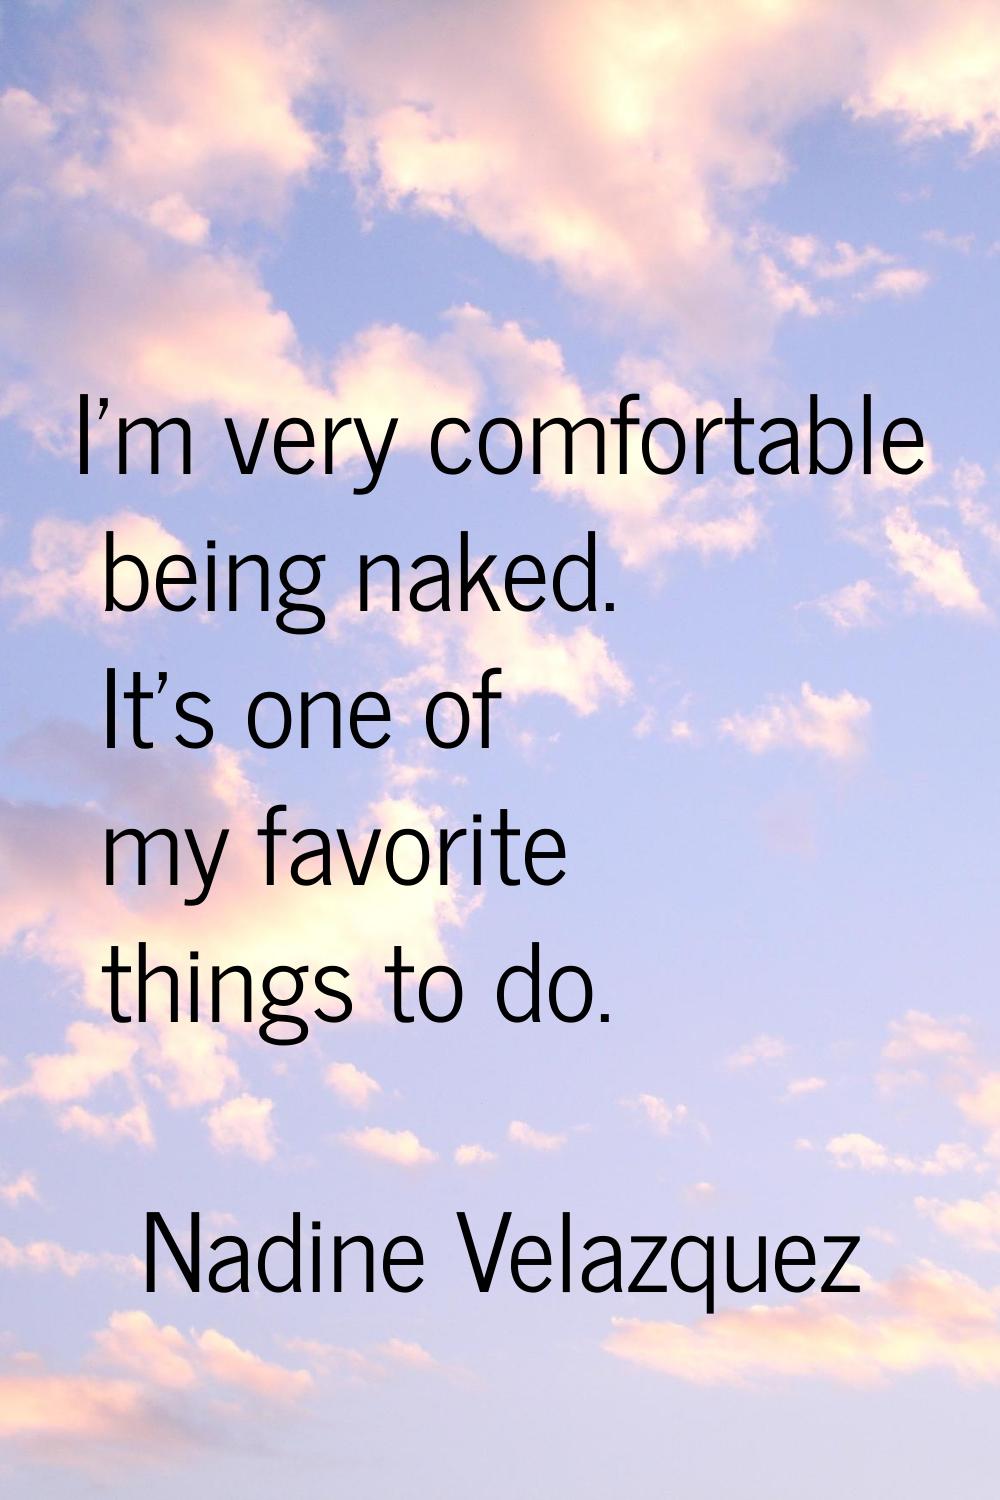 I'm very comfortable being naked. It's one of my favorite things to do.